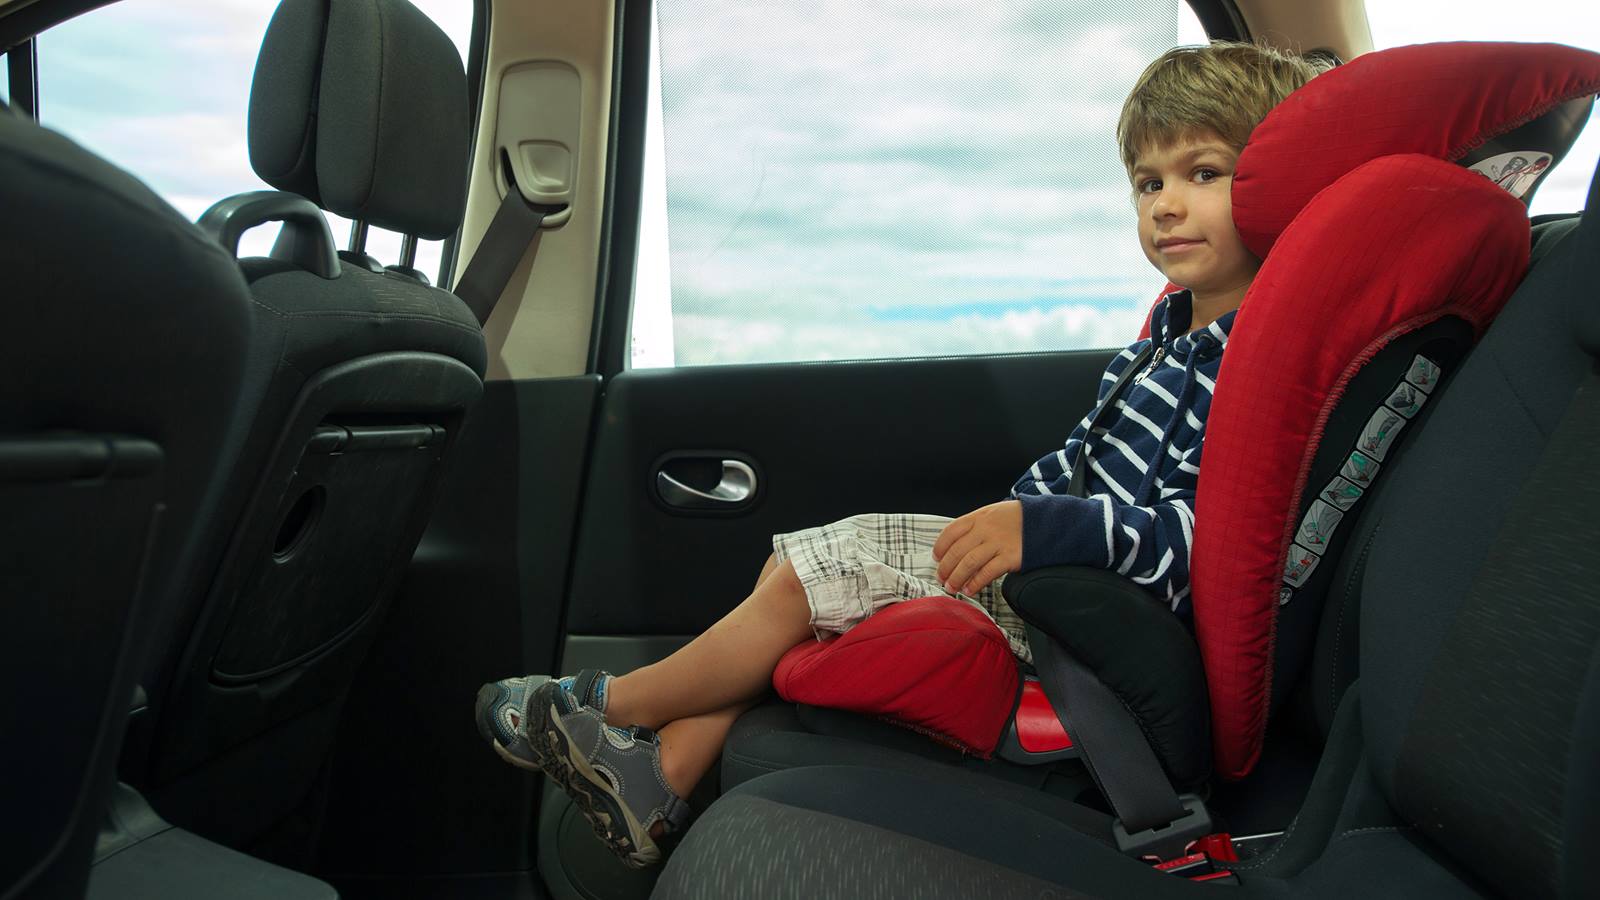 Child Ready To Move Into A Booster Seat, What Age Does A Kid Need To Be In Booster Seat